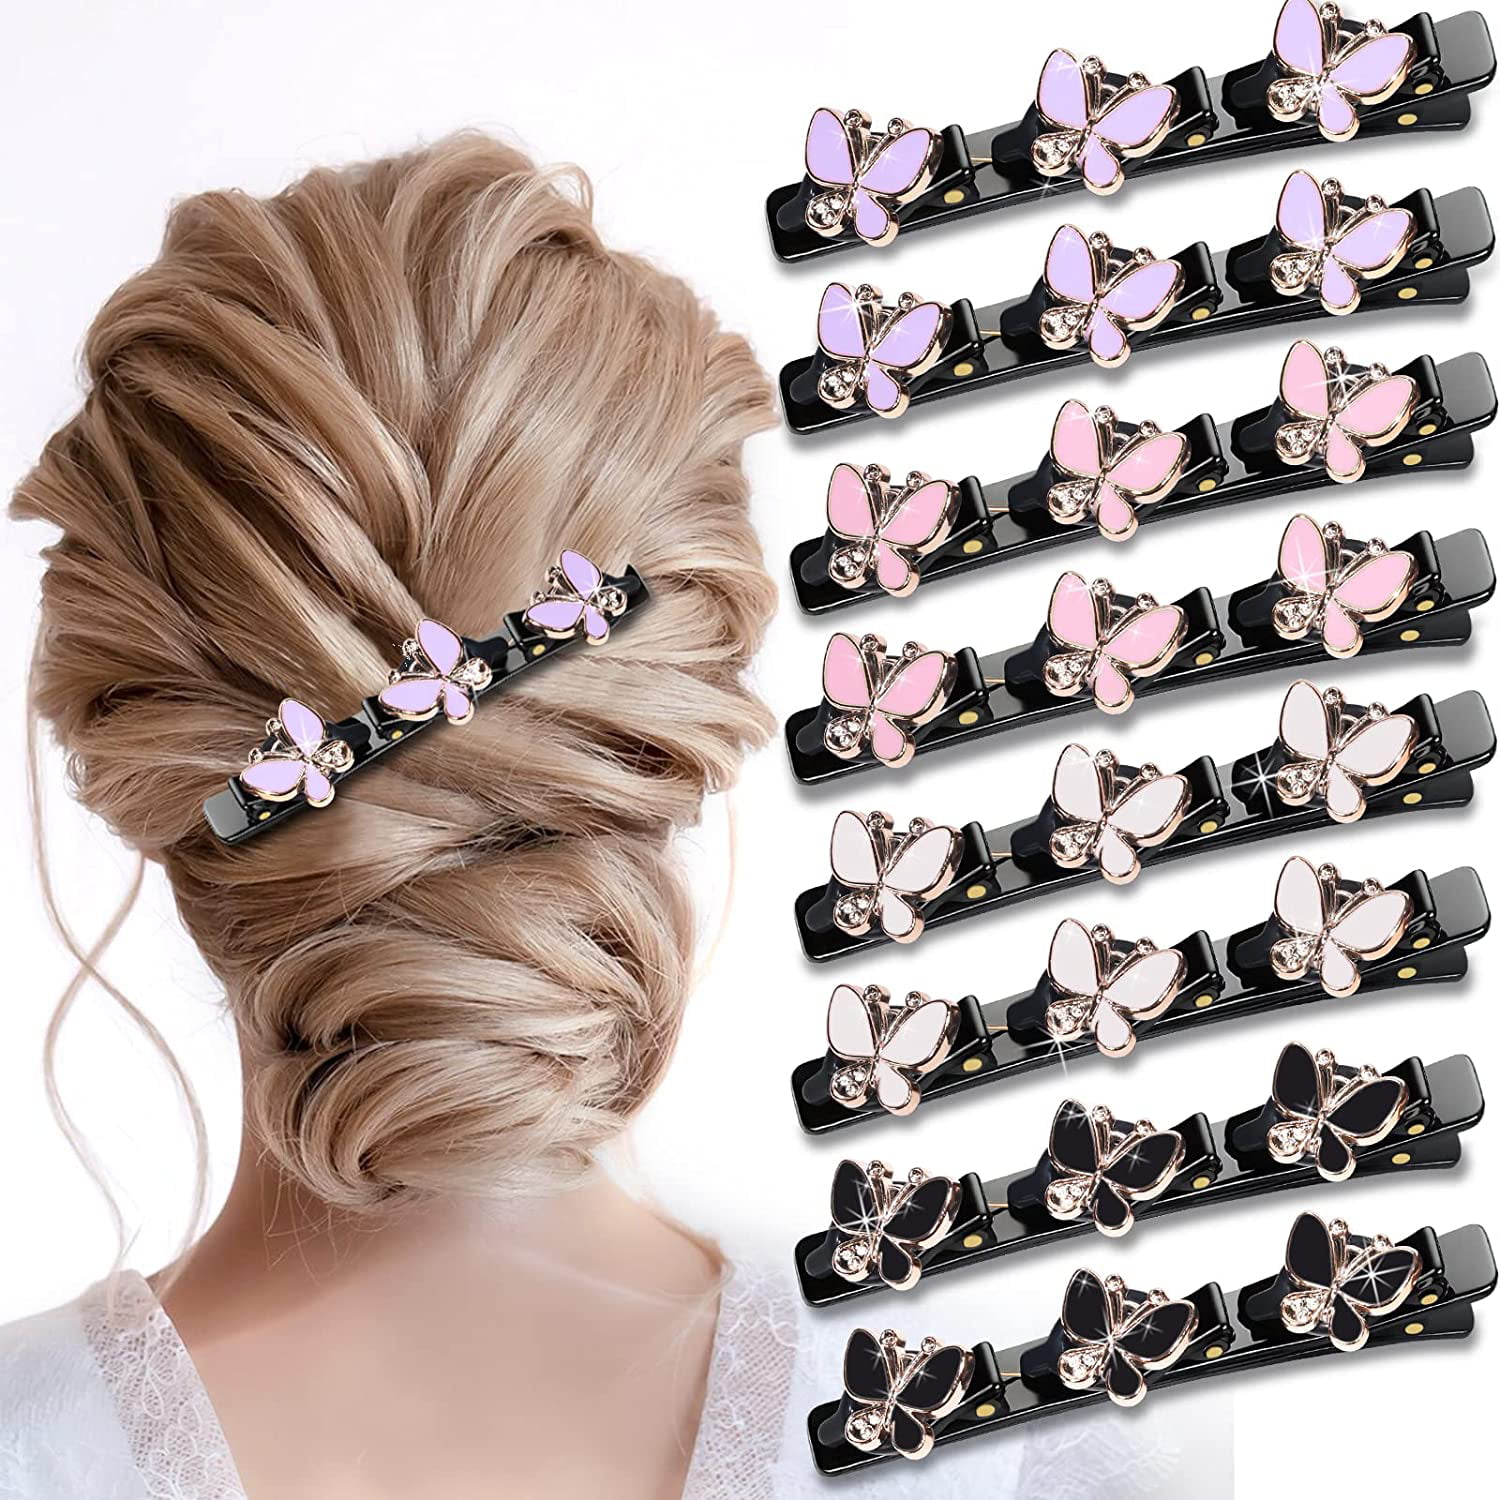 Braided Hair Clip with 3 Small Clips, Multi Clip Hair Barrette, Triple Hair  Clips with Rhinestones for Sectioning (Clover&Plum-8 PCS)